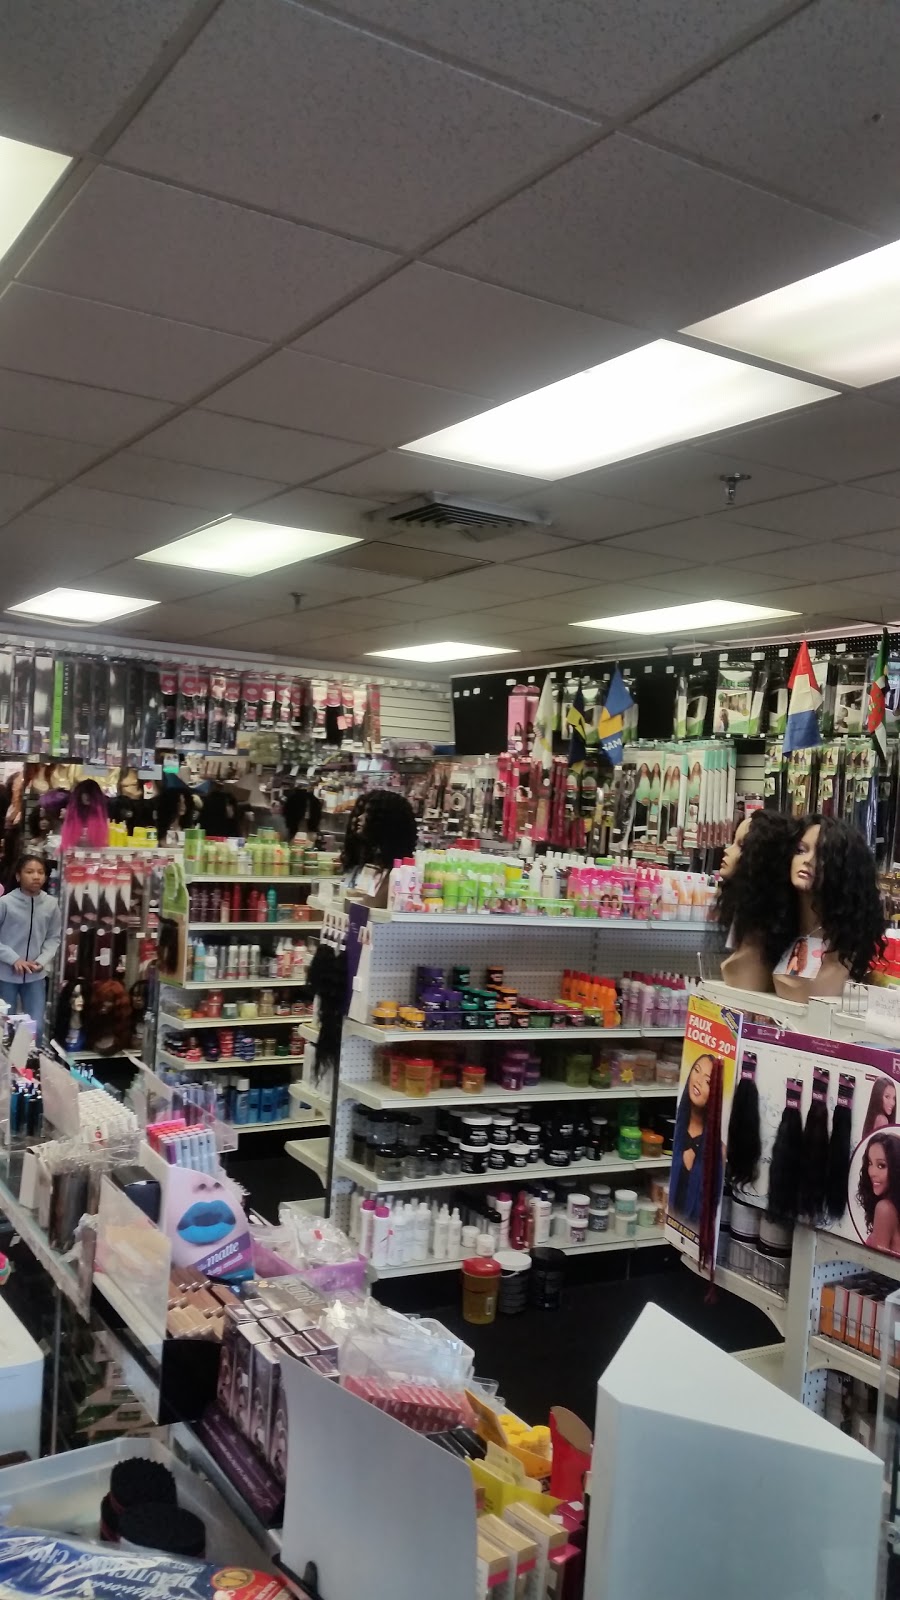 Strouds Beauty And Hair Supplies | 1120 N 9th St, Stroudsburg, PA 18360 | Phone: (570) 420-1965